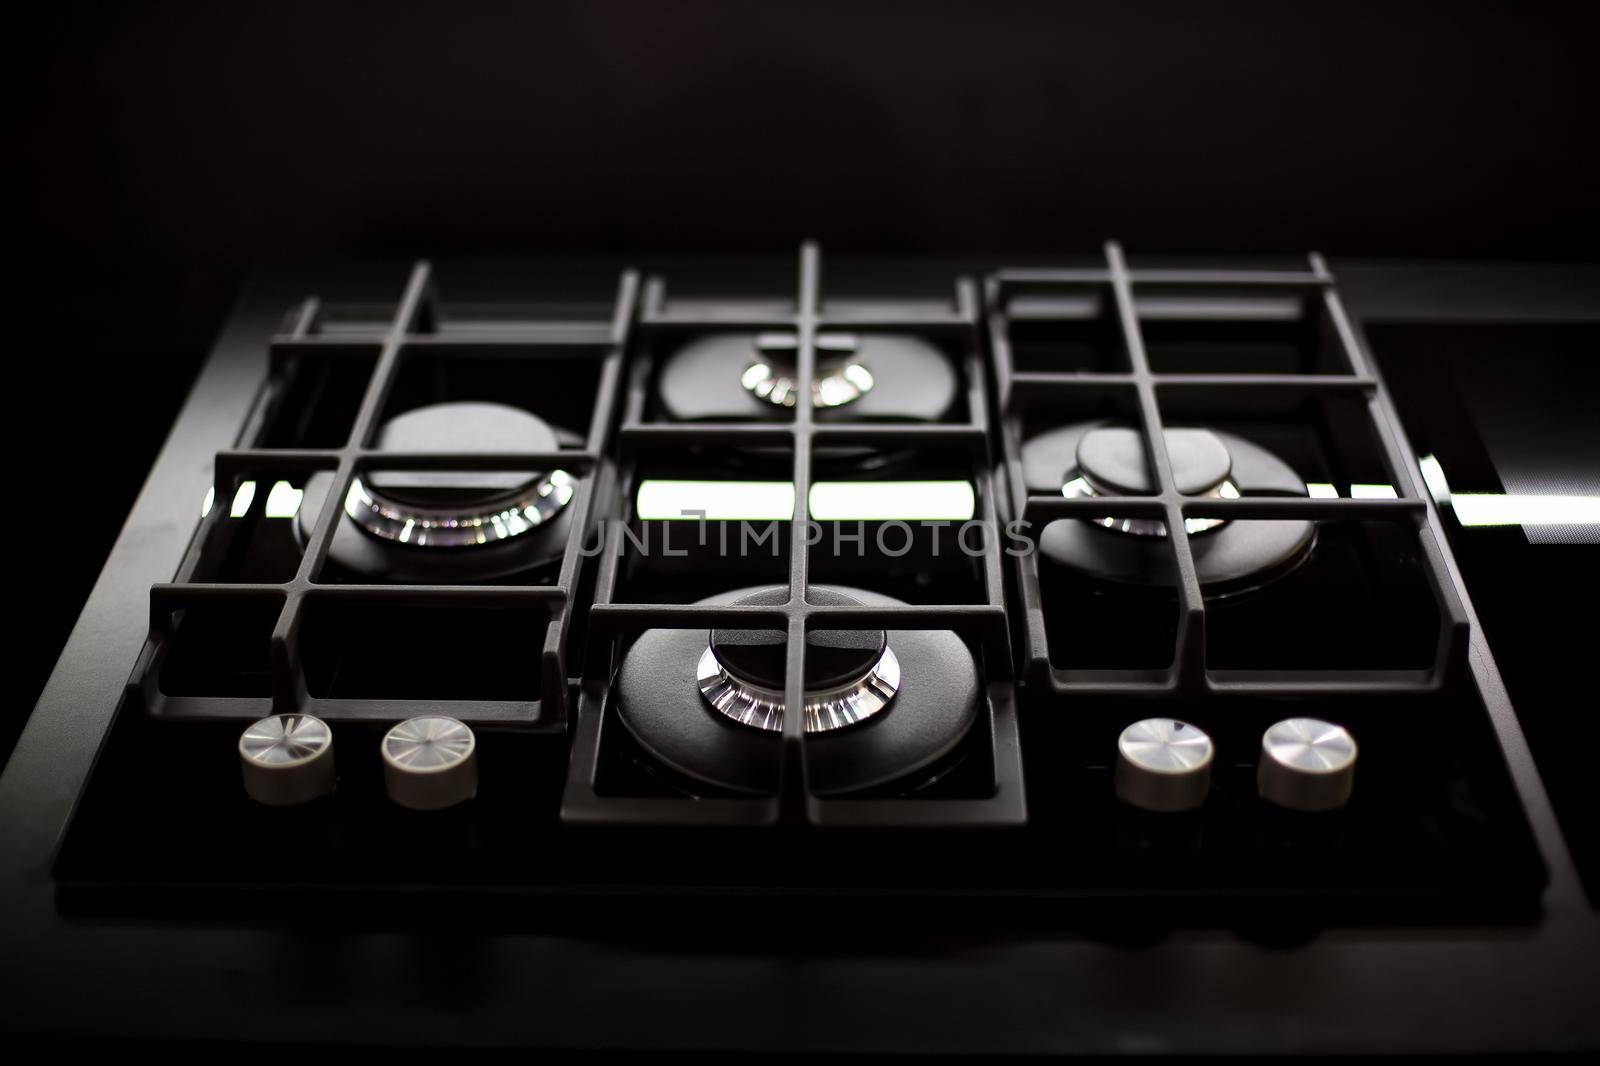 New modern black gas stove with four burners for the kitchen, stainless steel surface. Cast iron grates, top view, close up, black background.